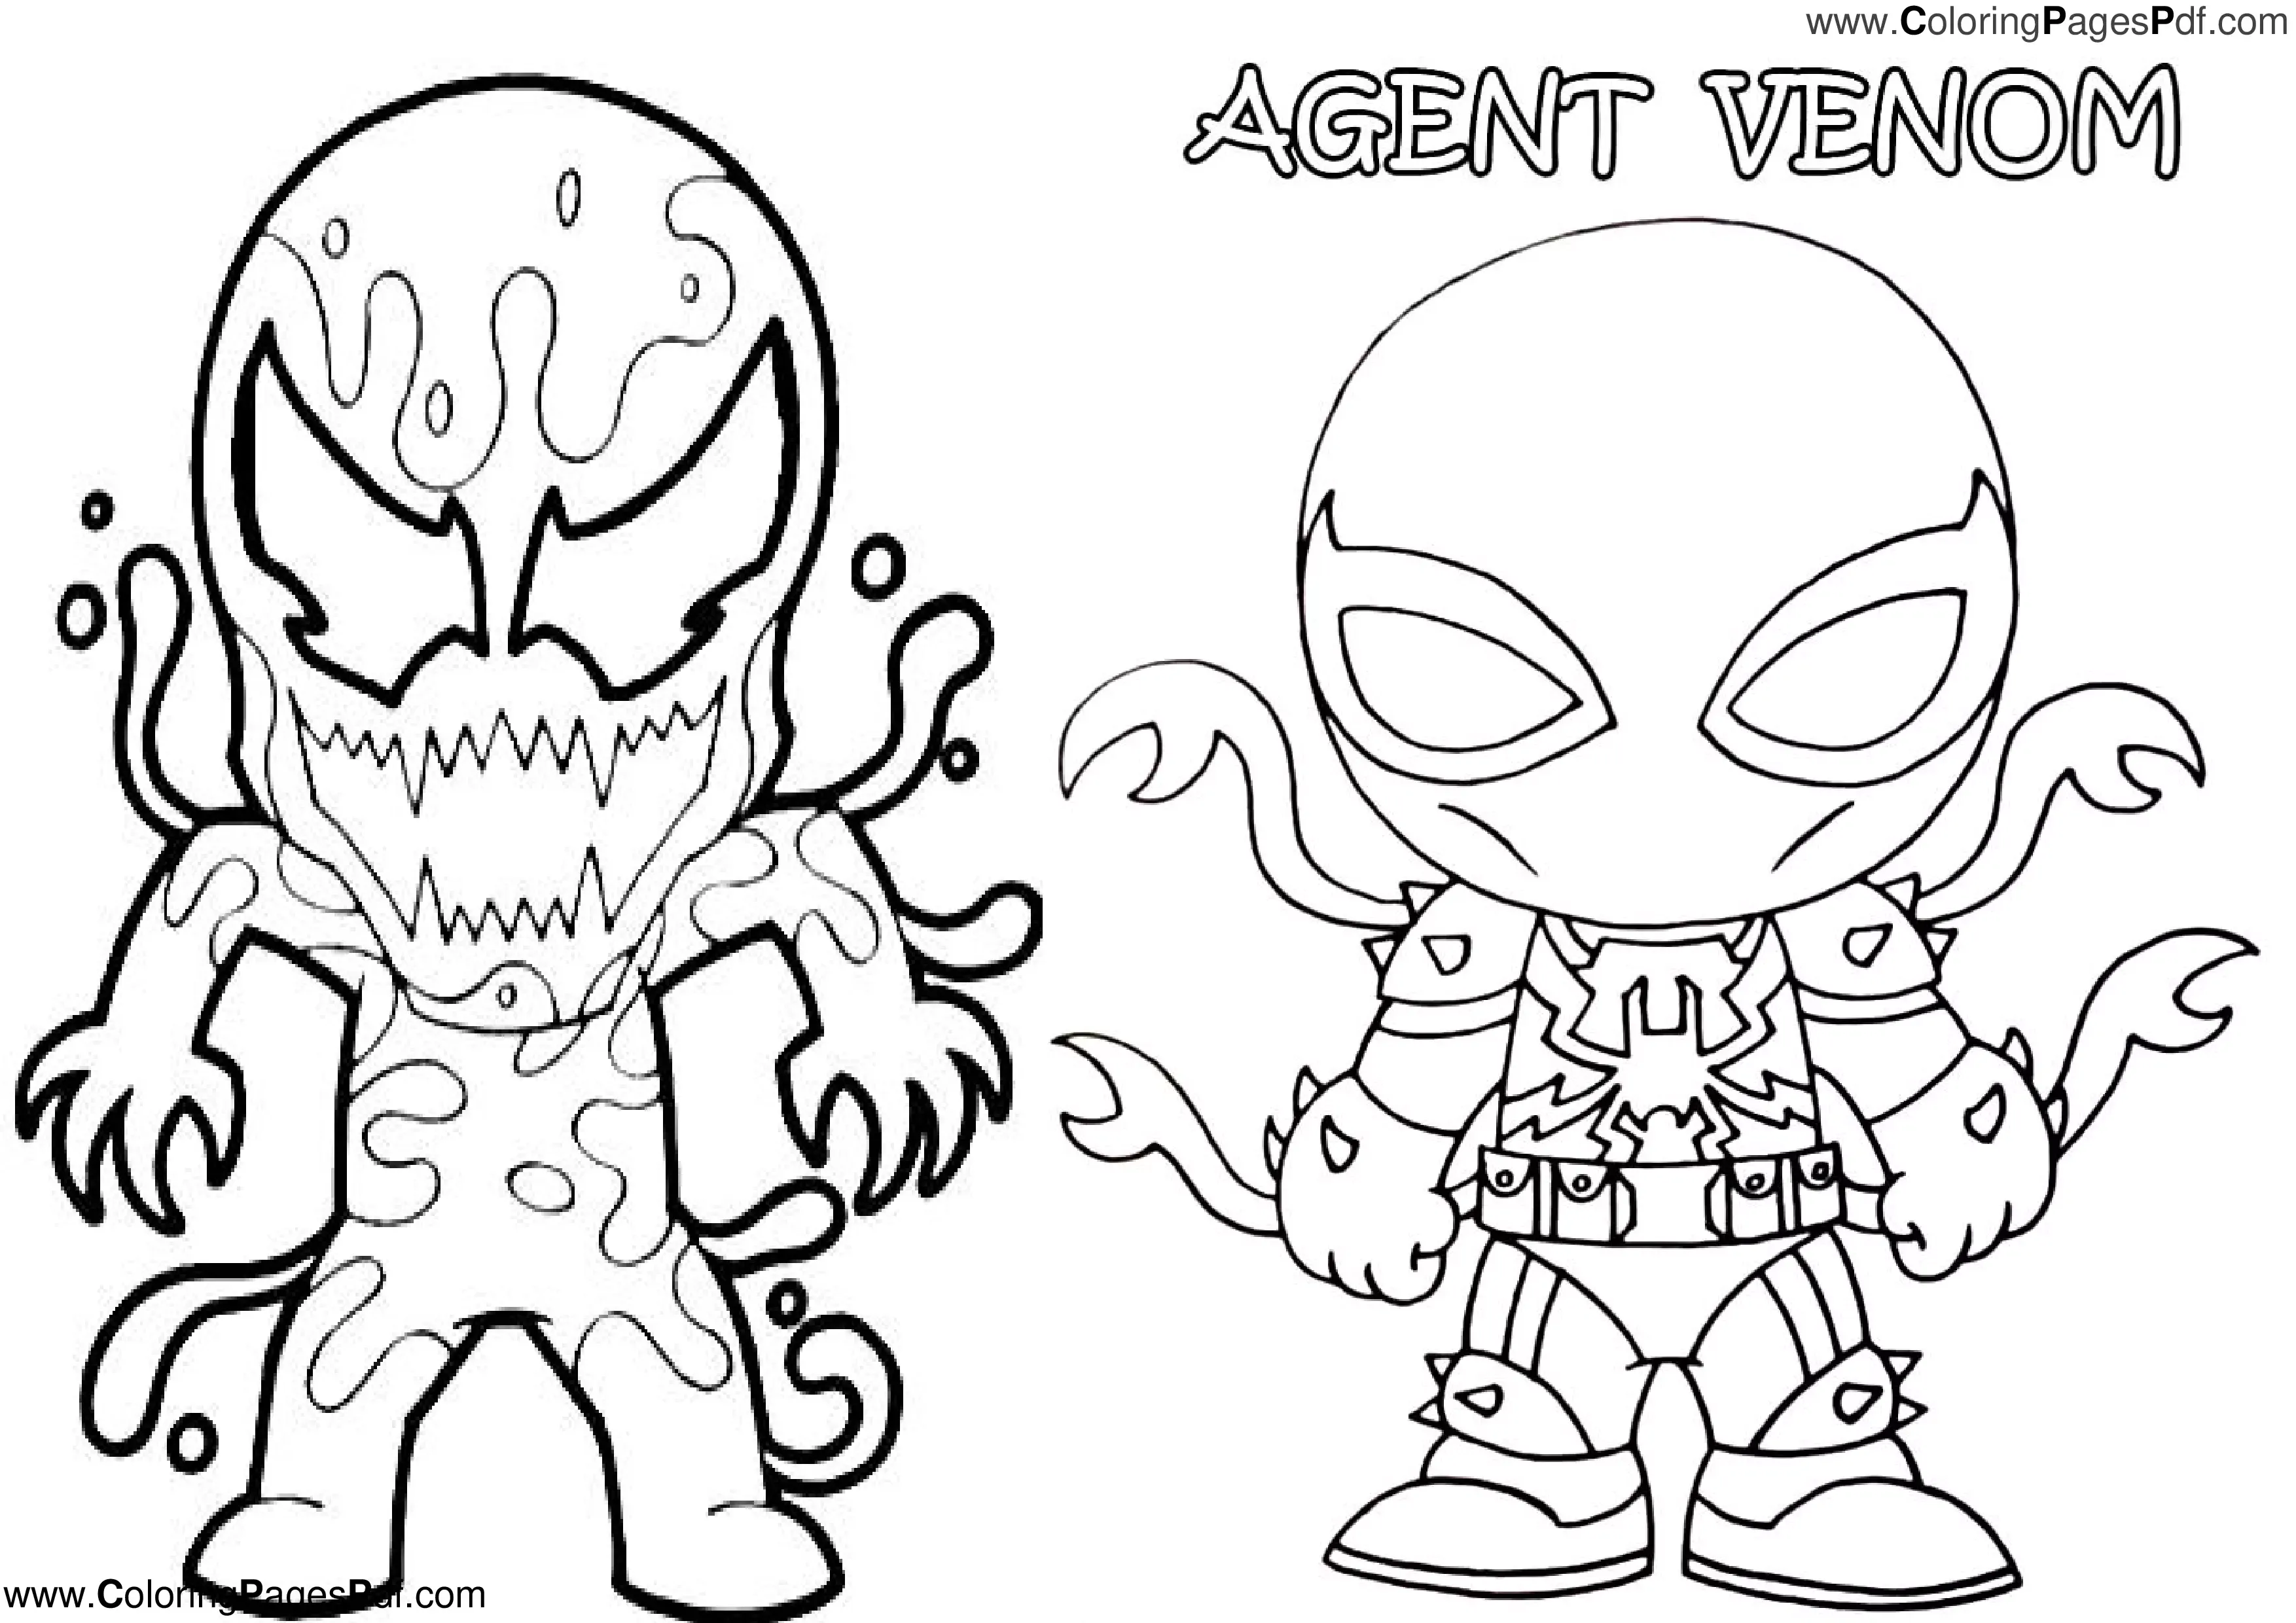 Easy venom coloring pages